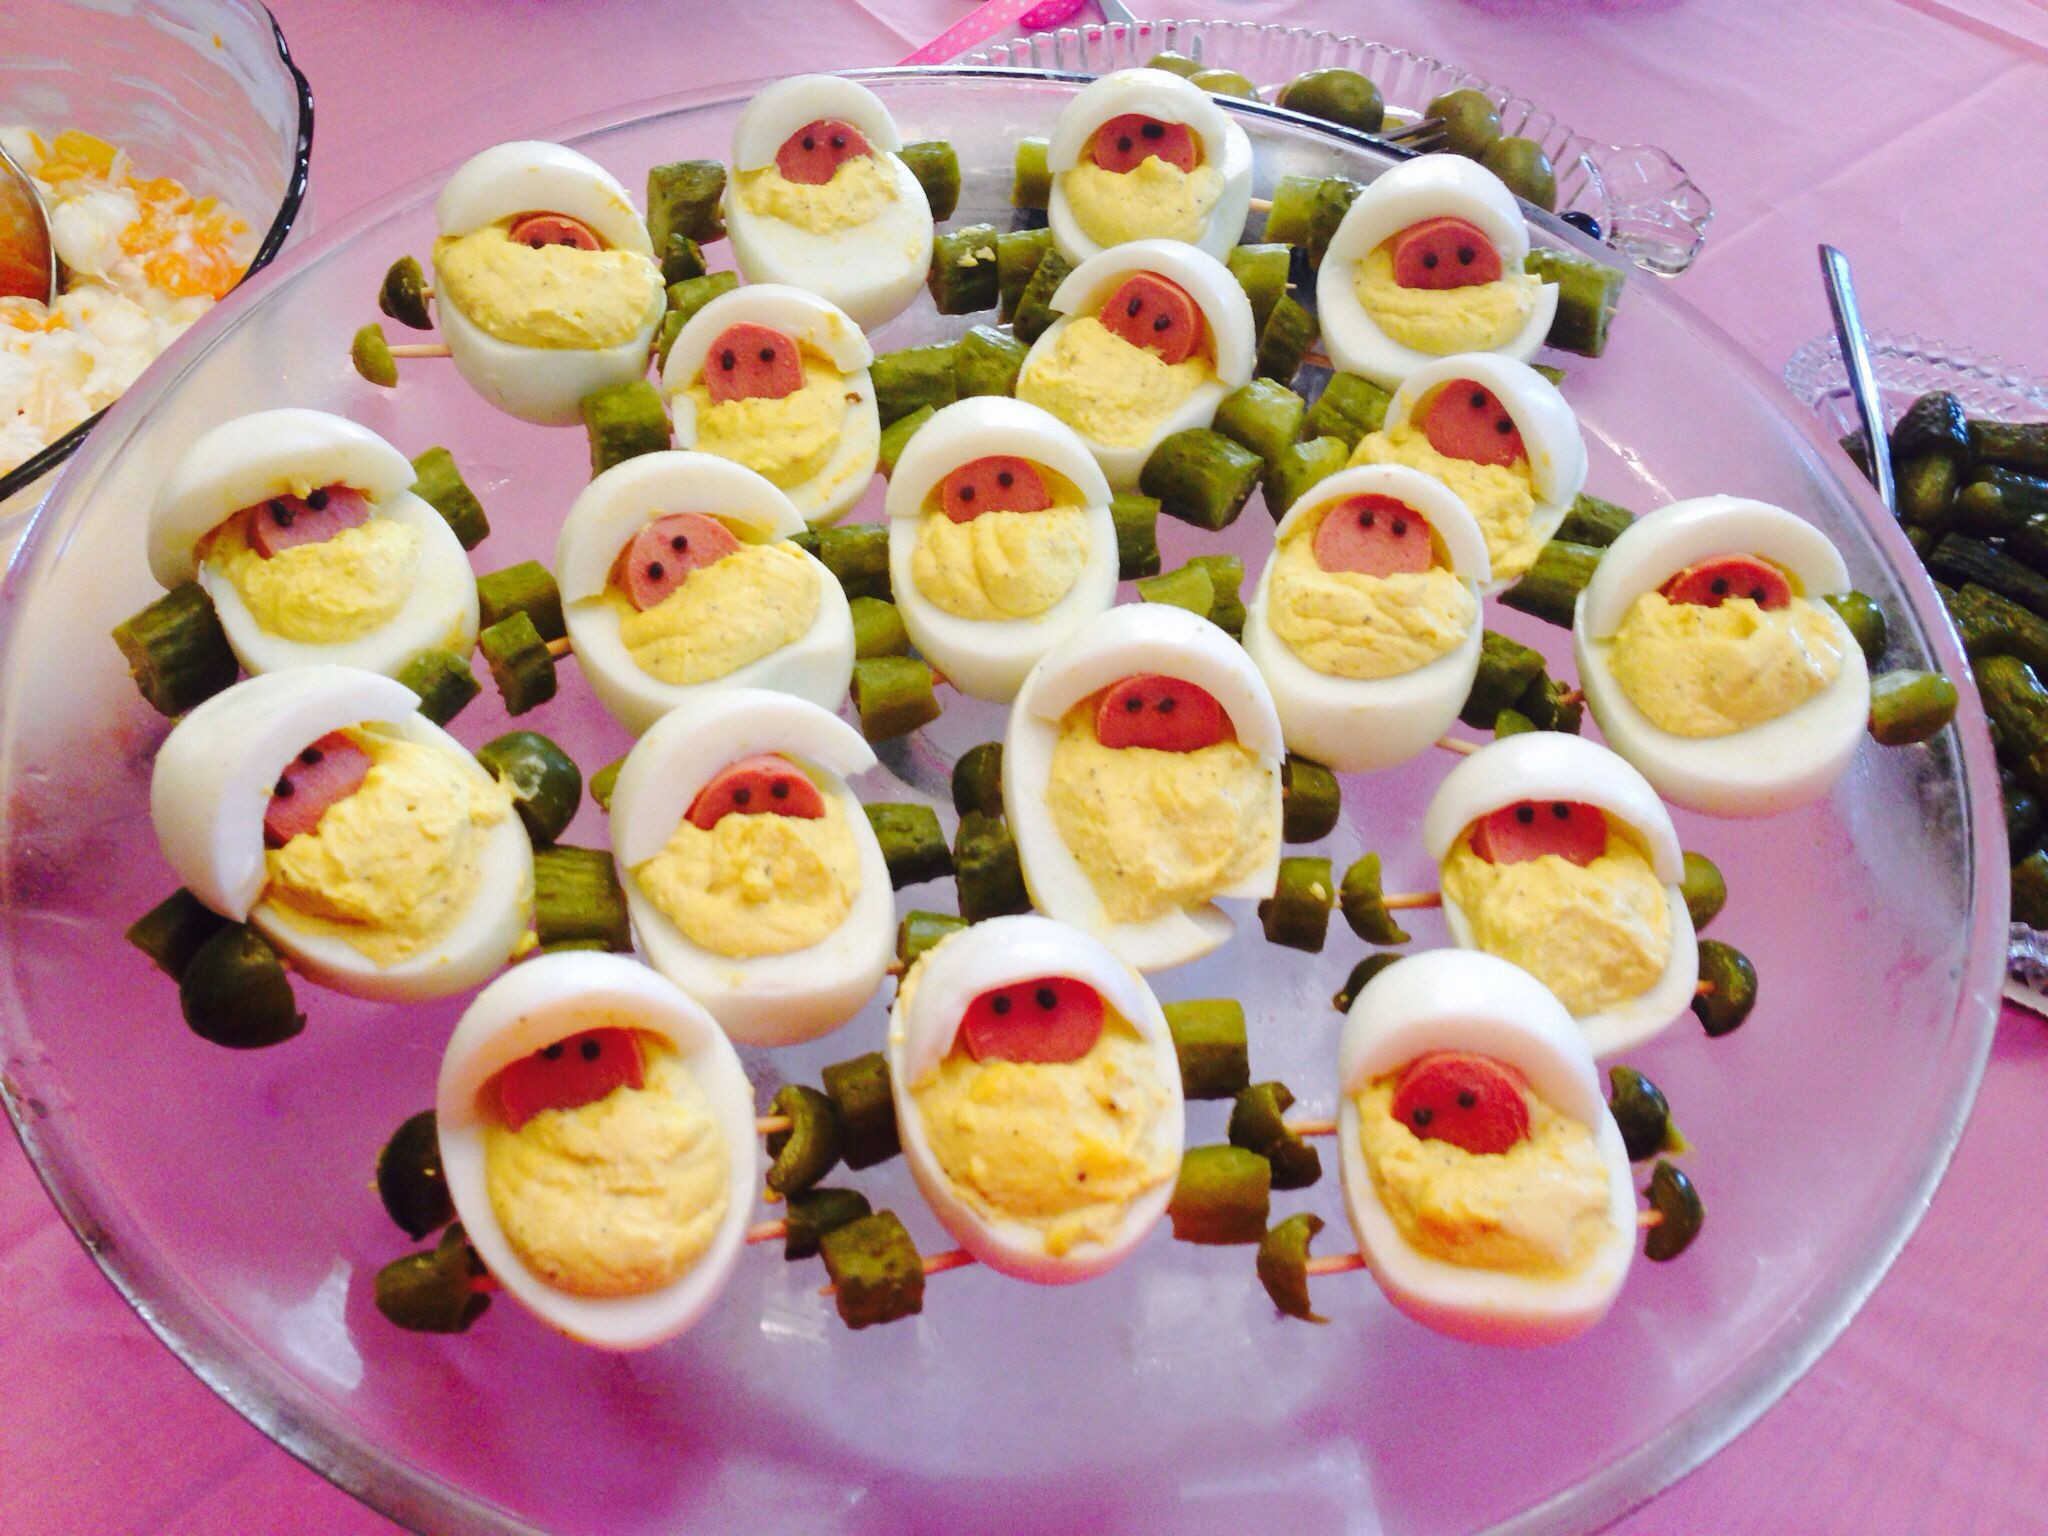 Baby Carriage Deviled Eggs Lovely Baby Carriage Deviled Eggs ashlei Pinterest